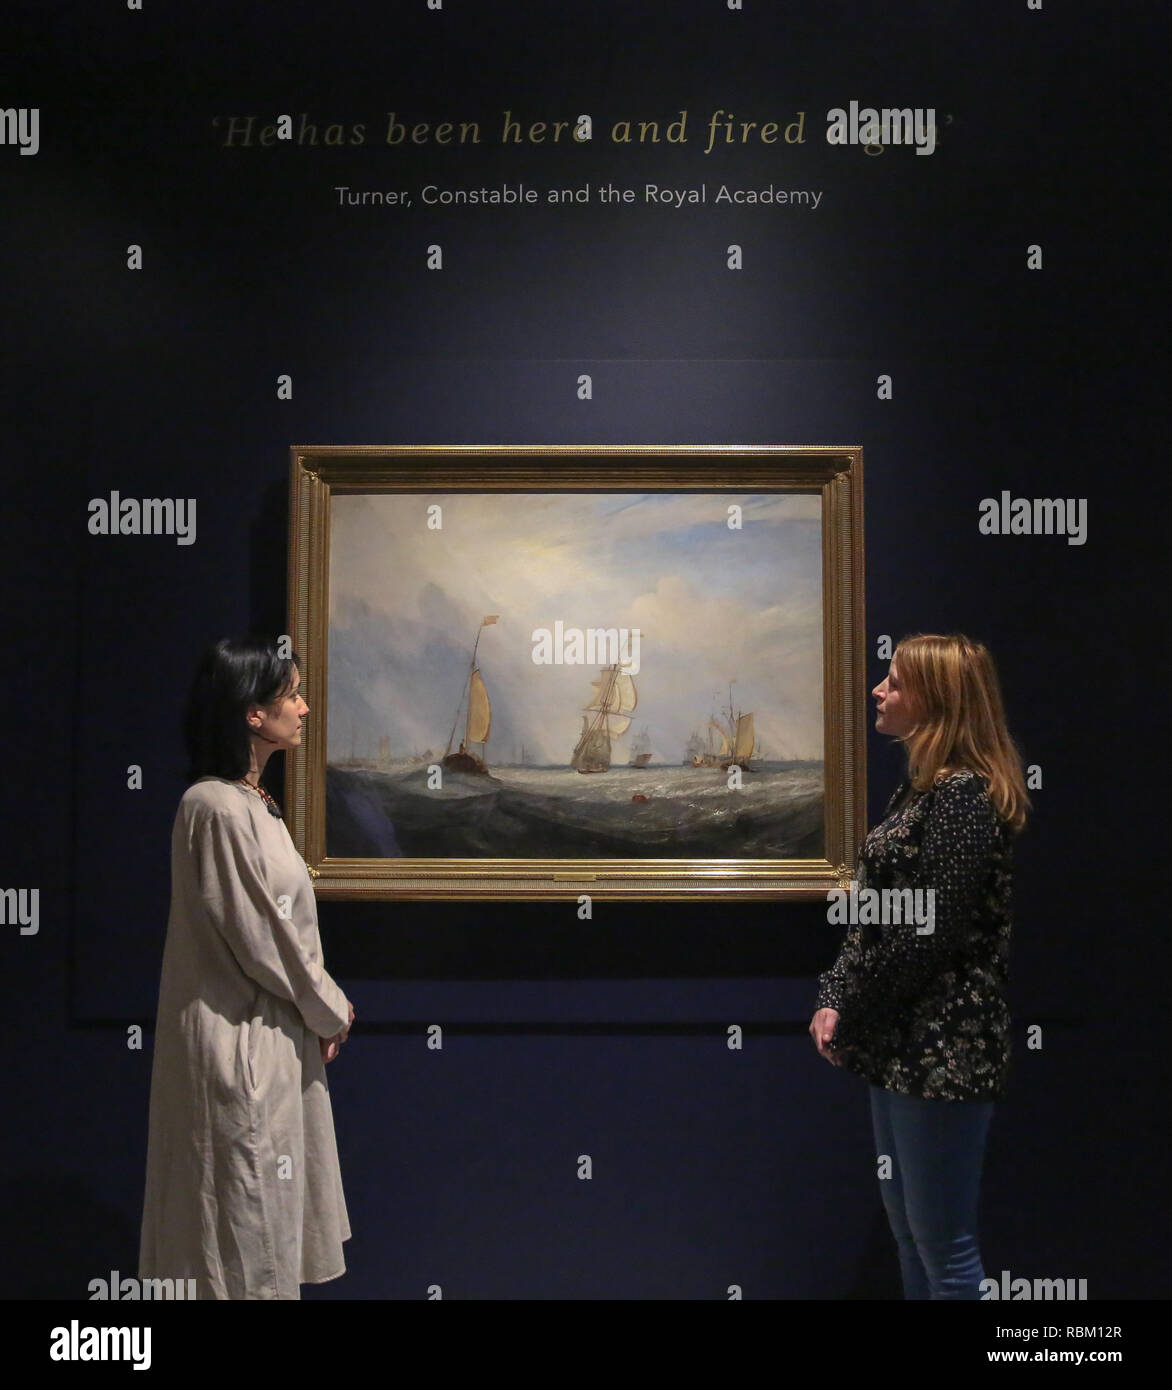 London, UK. 11th Jan, 2019. Staff members seen viewing a painting by J.M.W. Turner.The Royal Academy Schools' most illustrious graduates, exhibits Helvoetsluys ('Helvoetsluys; - the City of Utrecht, 64, going to sea') 1832 by J.M.W. Turner (1775-1851) and The opening of Waterloo Bridge ('Waterloo Bridge, from the Whitehall Stairs, 18th June 1817) by John Constable (1776-1837), in, are-telling of one of the most legendary events in the history of the Summer Exhibition, it toke place at the Royal Academy of Arts. The two paintings were reunited for the first time since the Stock Photo